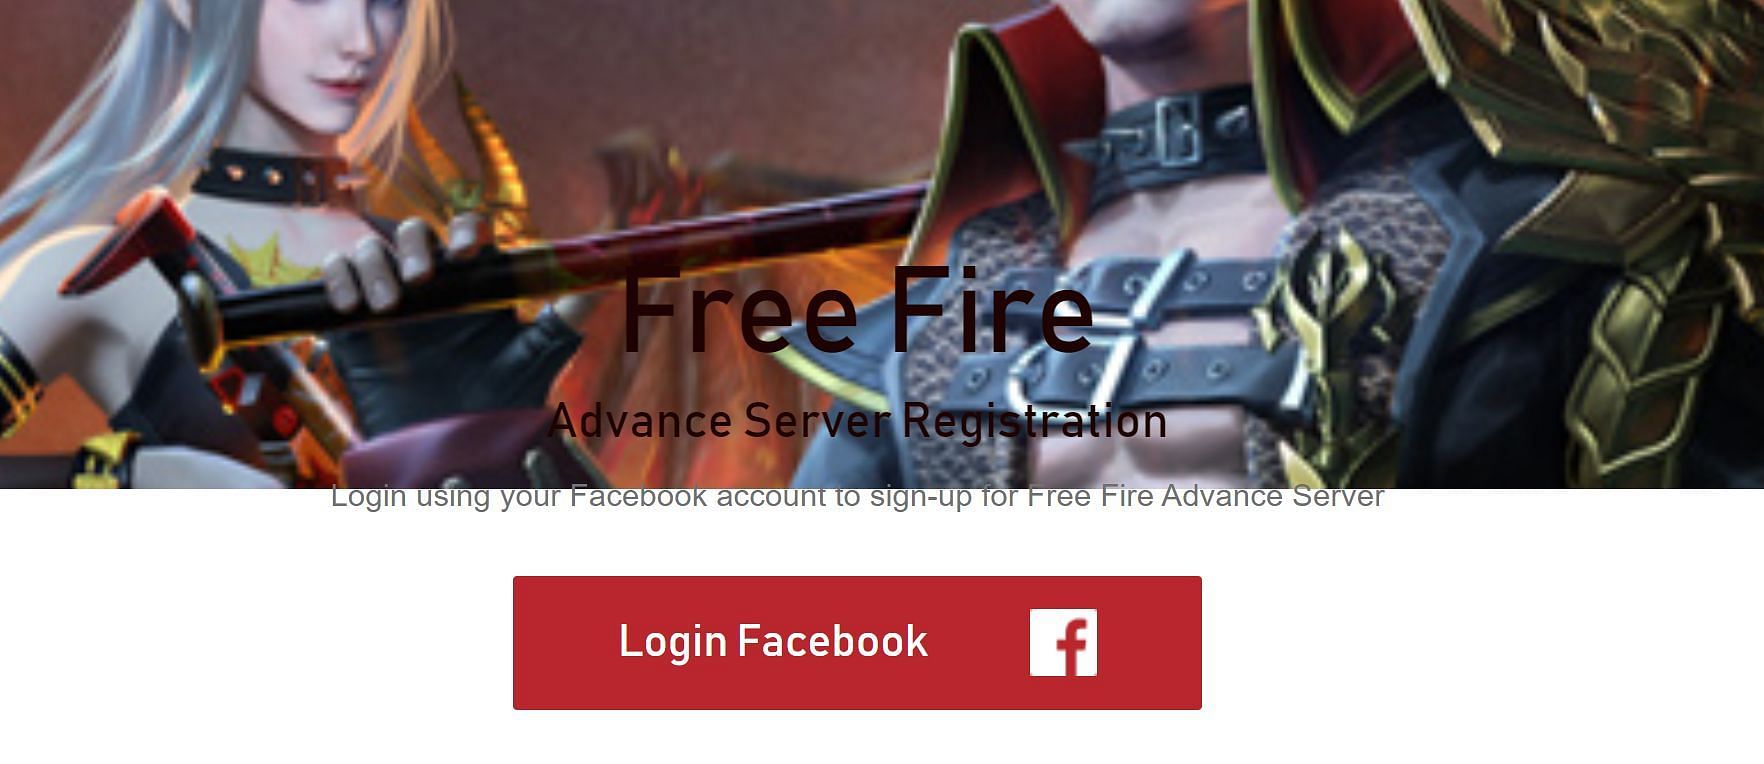 After users tap on &quot;Login Facebook,&quot; they need to enter their credentials and login (Image via Free Fire)